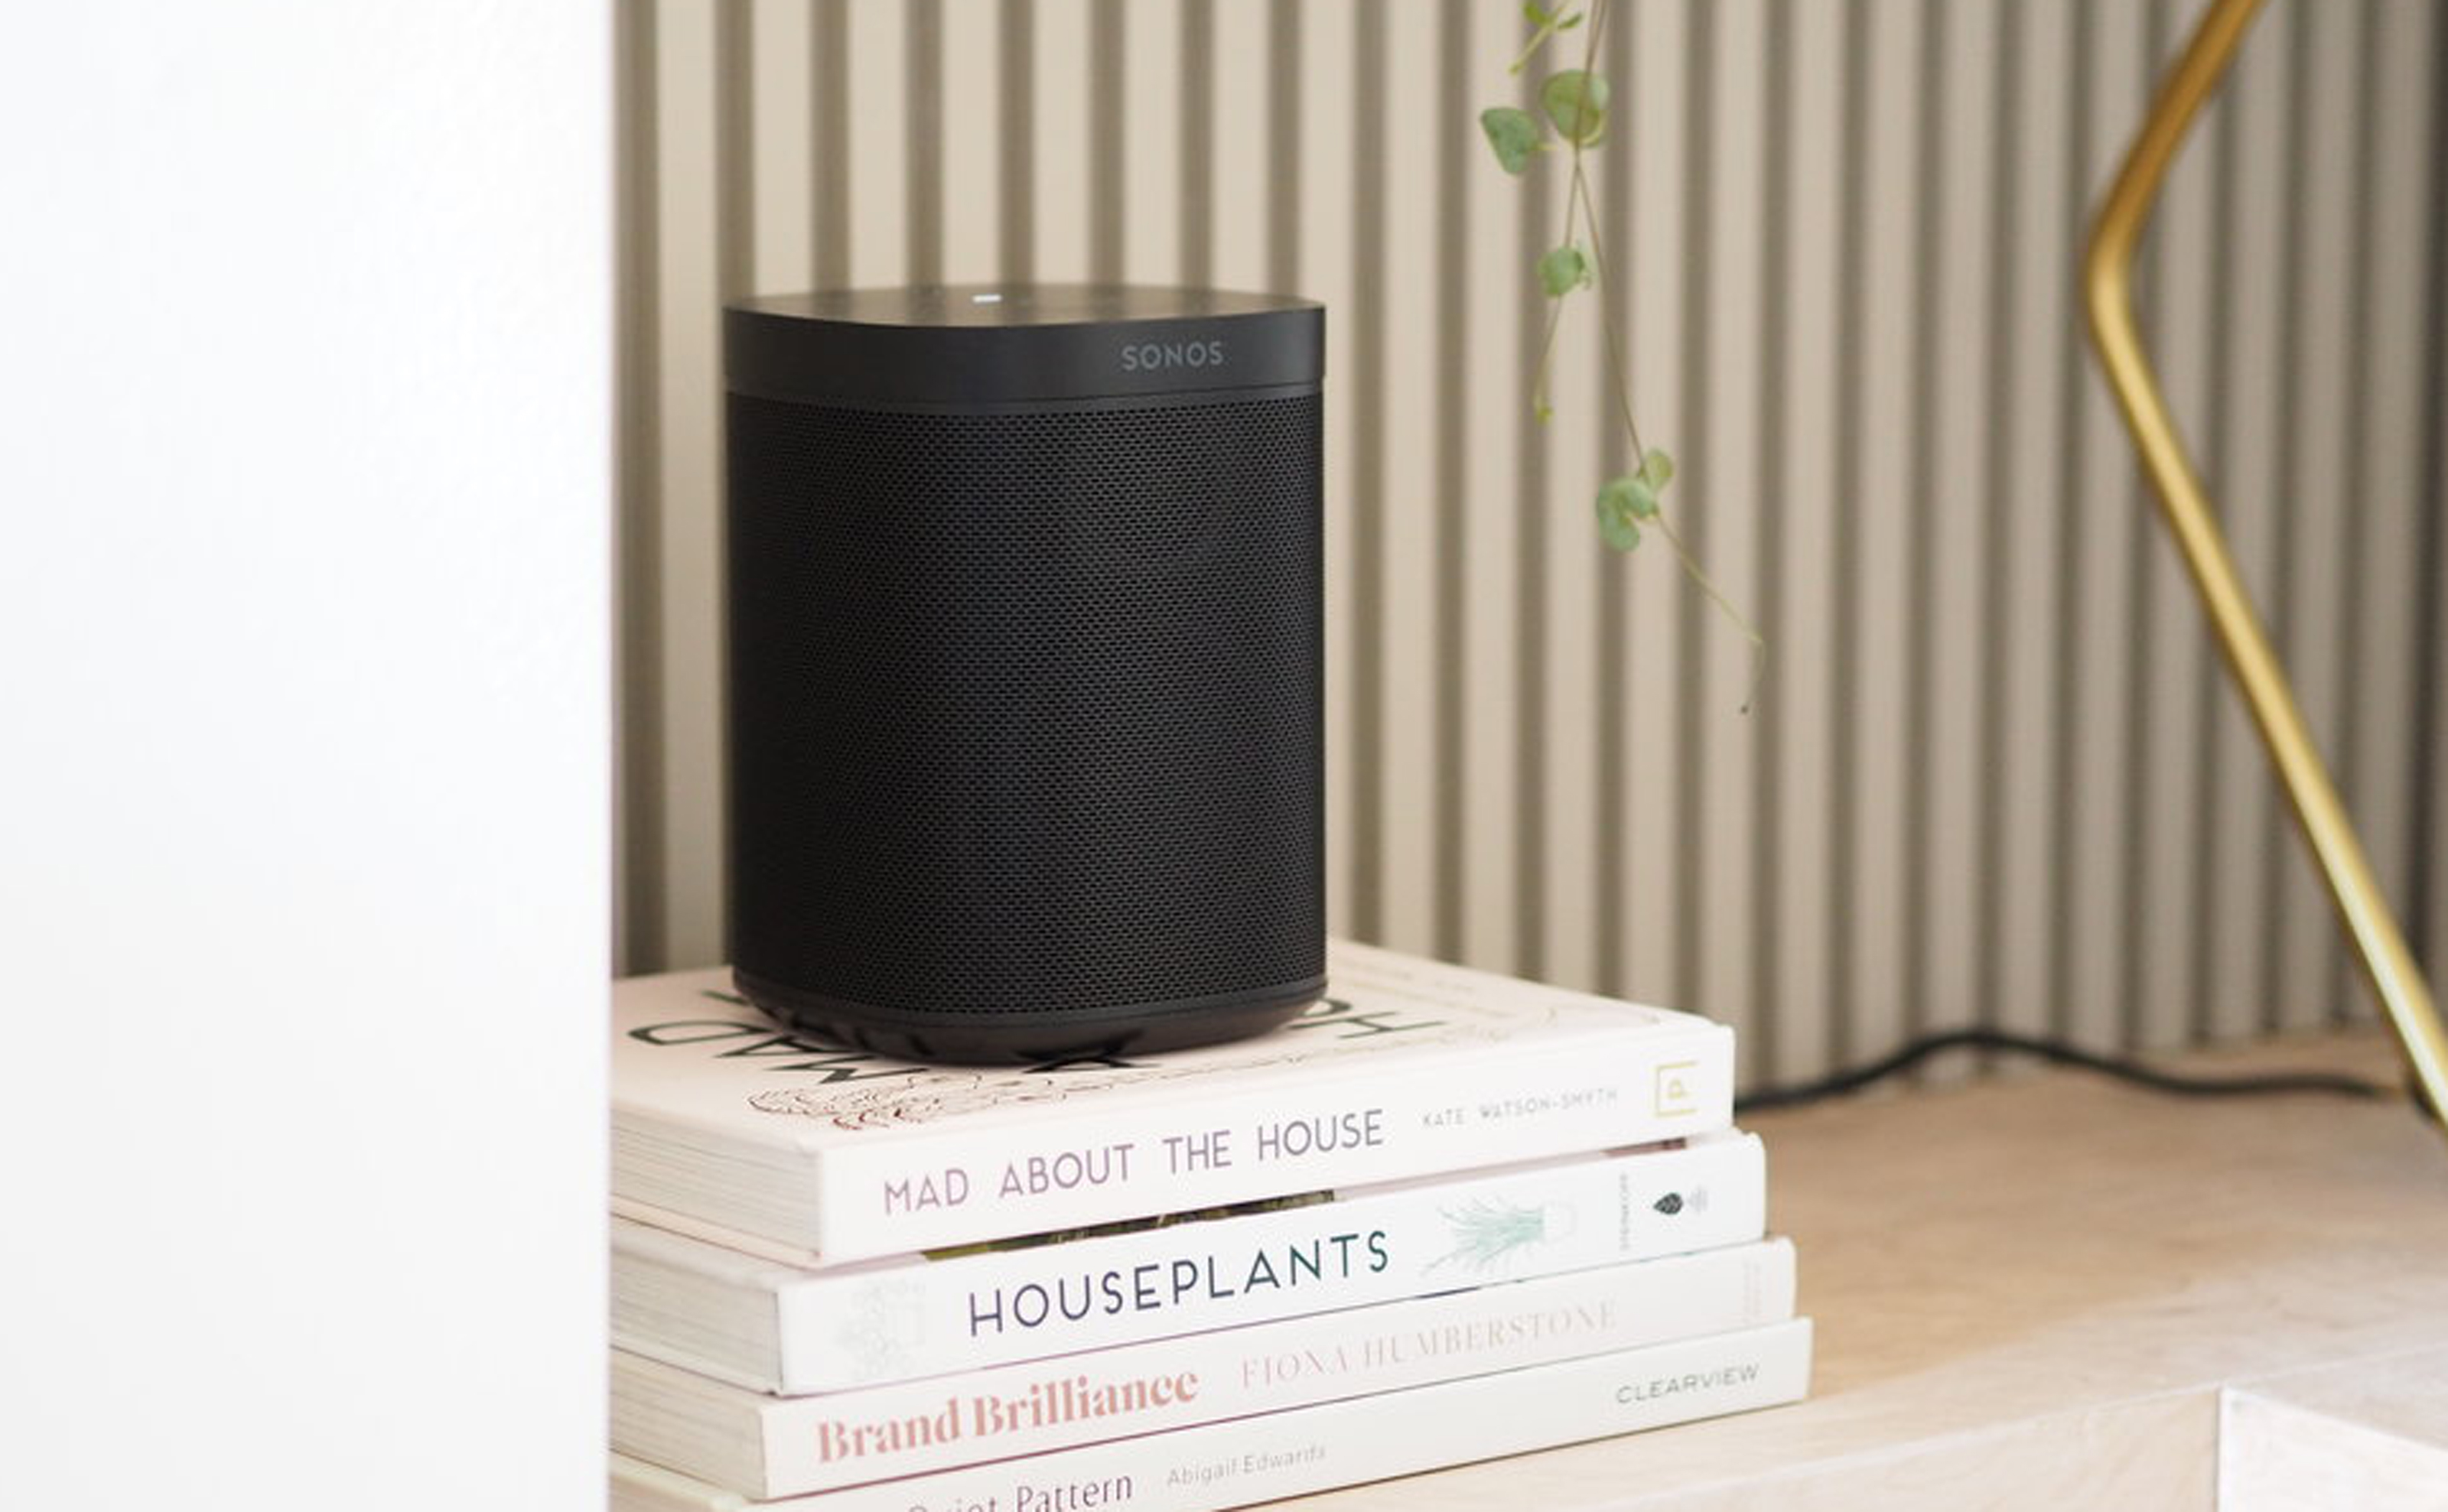 Sonos One One are the extra features worth the price? |